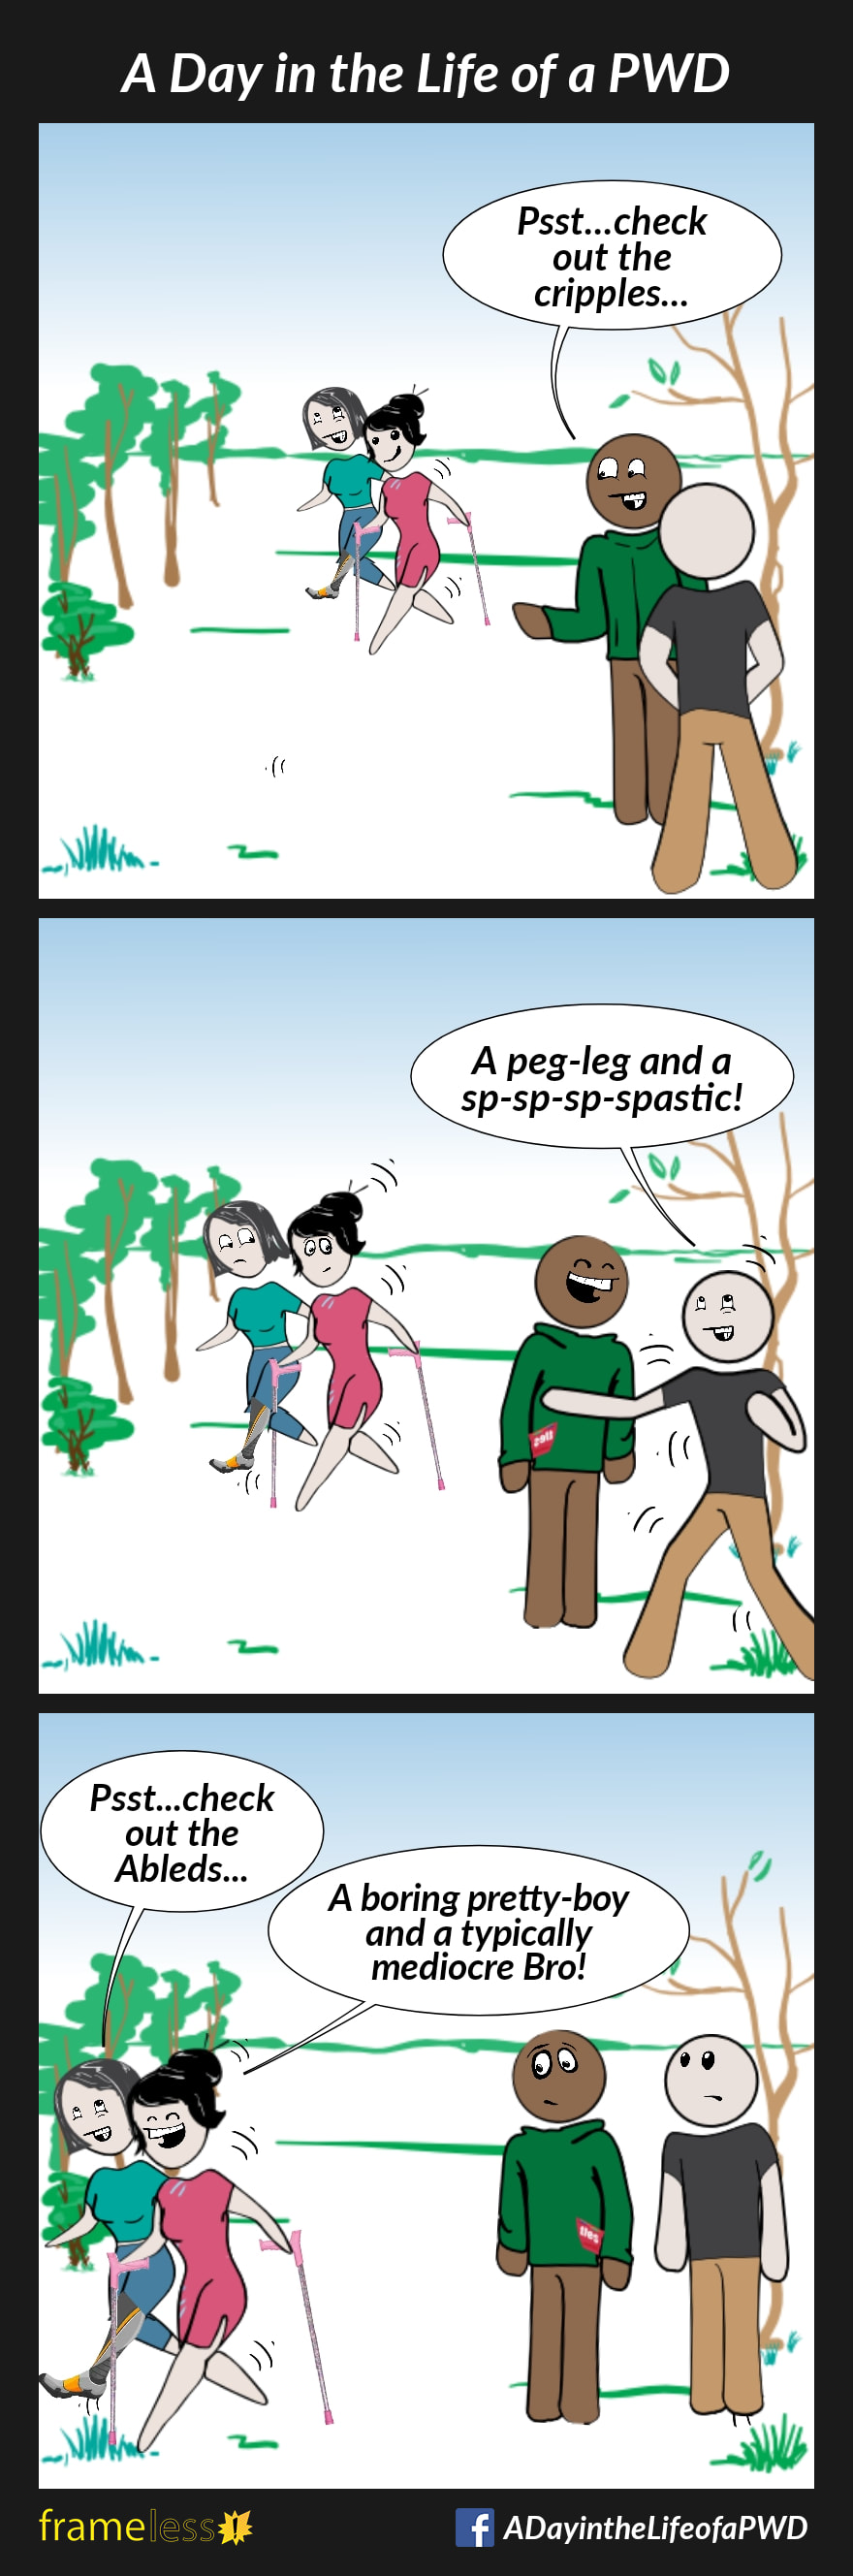 COMIC STRIP 
A Day in the Life of a PWD (Person With a Disability) 

Frame 1:
A woman with a prosthetic leg is walking through a park with another woman who uses crutches shakily.
Two men notice them.
MAN A: Psst...check out the cripples...

Frame 2:
MAN B: A peg-leg and a sp-sp-sp-spastic!
Man A laughs.

Frame 3:
The women walk past the men.
WOMAN A: Psst...check out the Ableds...
WOMAN B: A boring pretty boy and a typically mediocre Bro!
Woman A laughs.